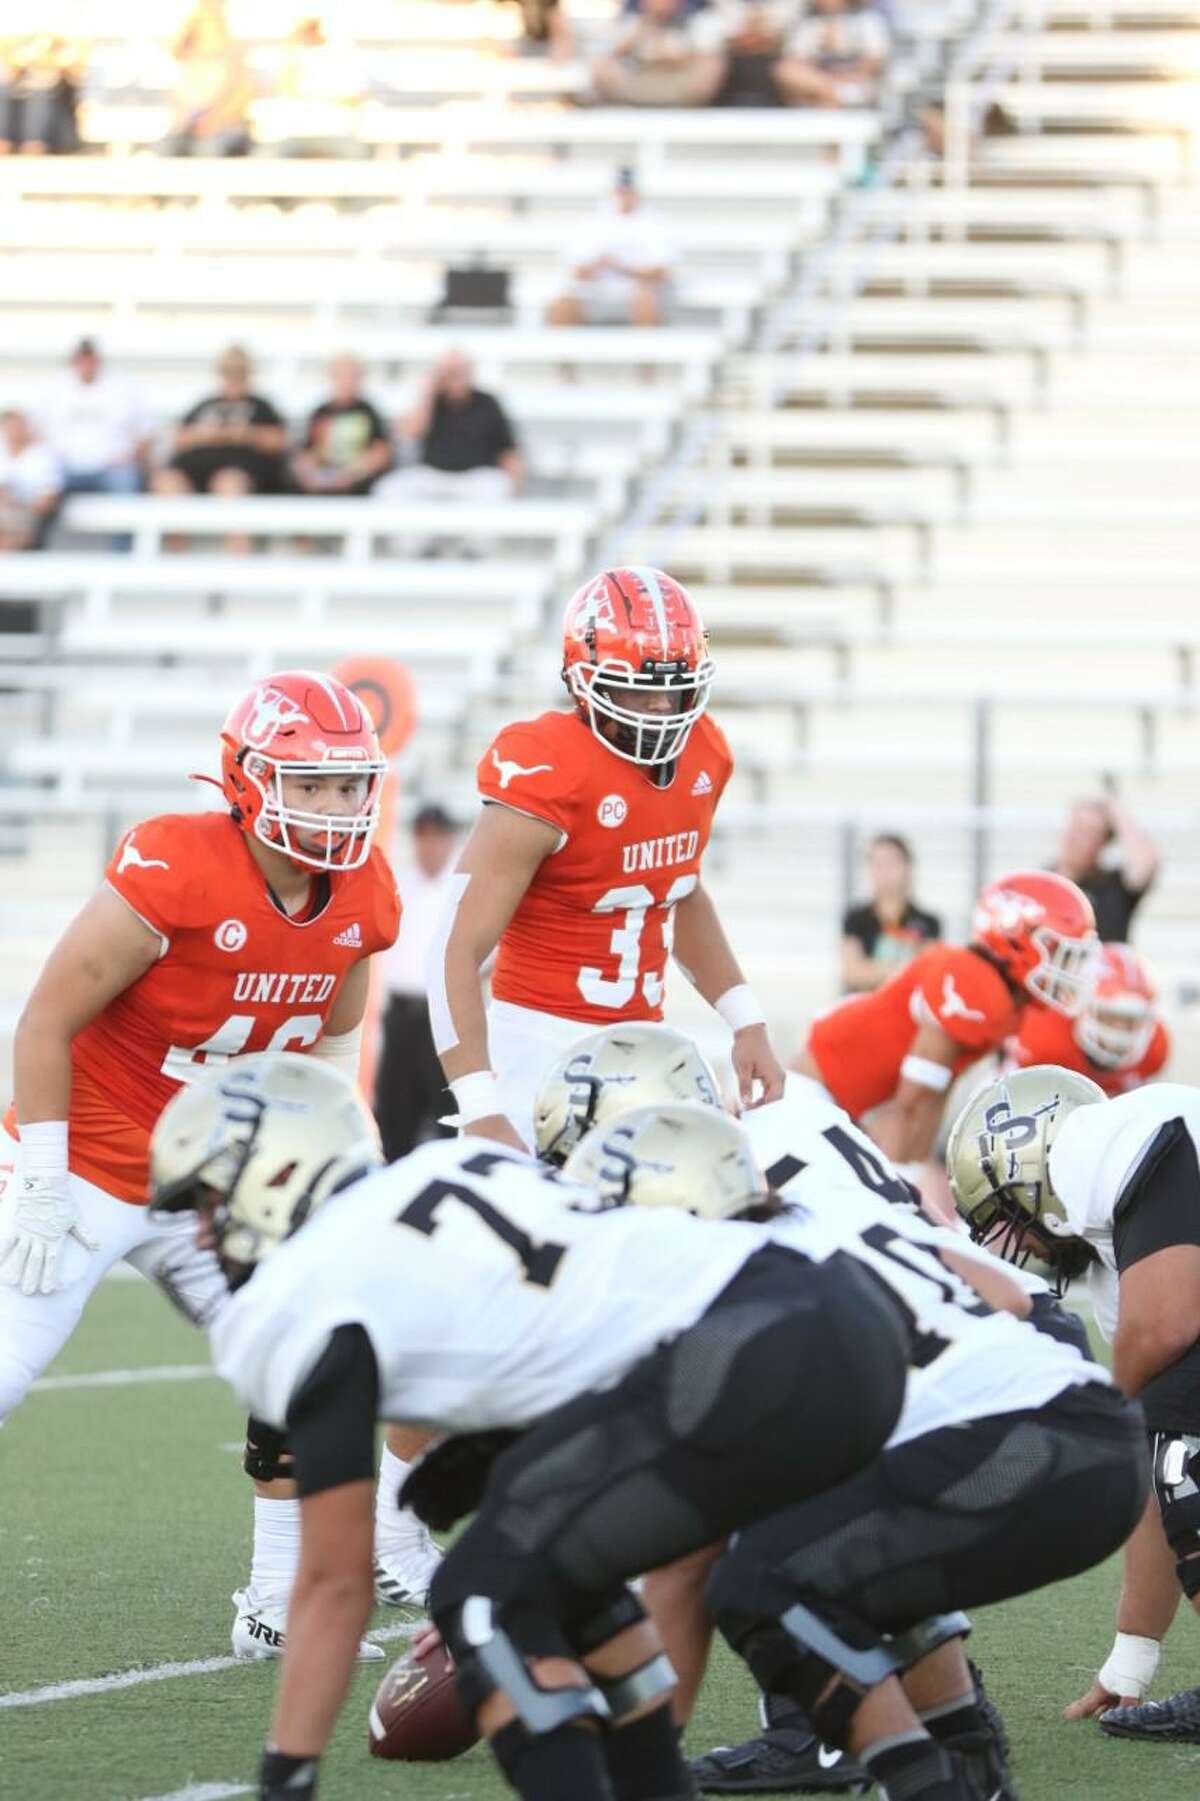 Gael Soto (46) and Luis Franco (33) line up against the Seguin offense on September 9, 2022.